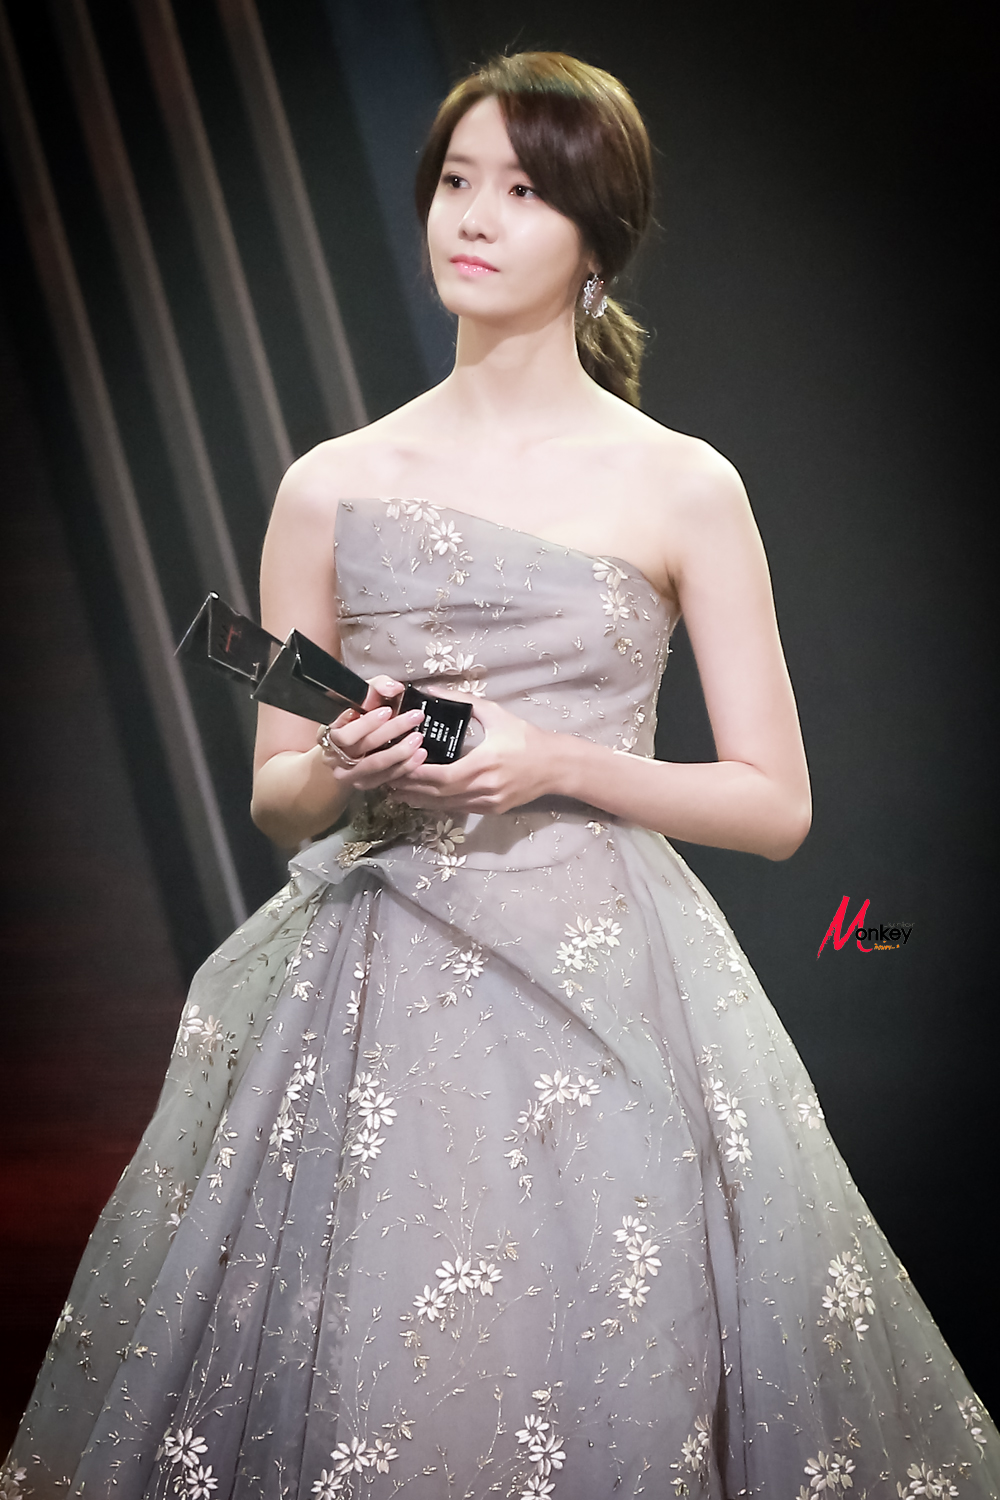 [PIC][16-11-2016]YoonA tham dự "'2016 Asia Artist Awards (AAA)" tại "Kyung Hee University Grand Peace Palace" vào tối nay - Page 4 24699E44583593111074DF